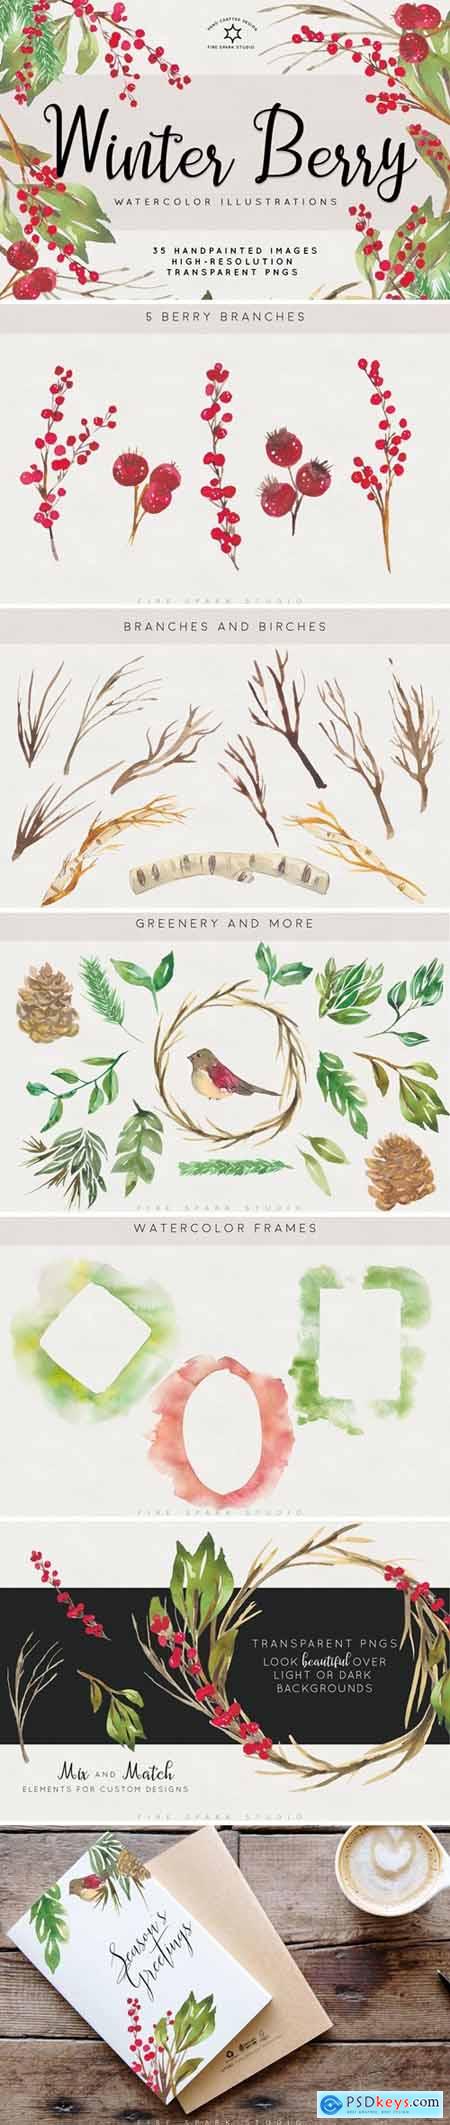 Winter Berry Watercolor Illustration 2993975